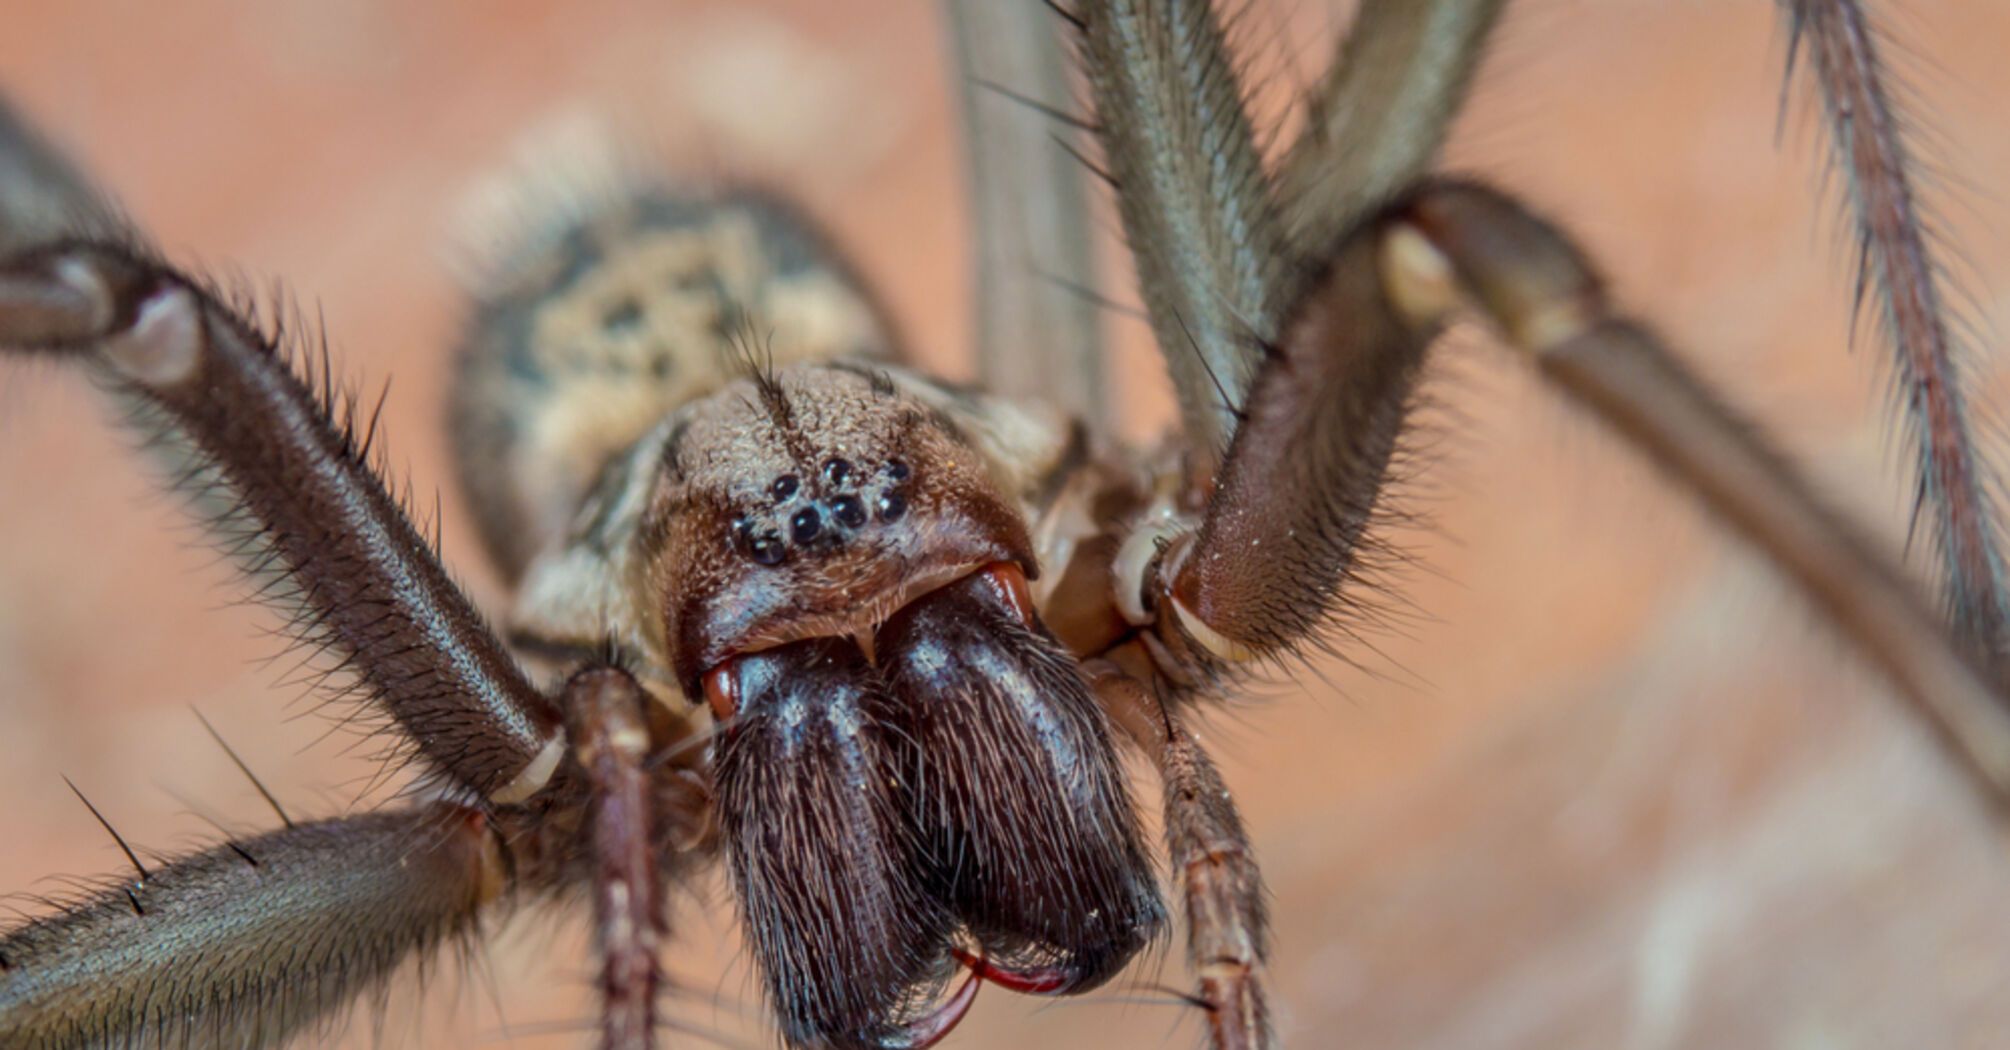 Spiders are safe and afraid of us more than weare of them